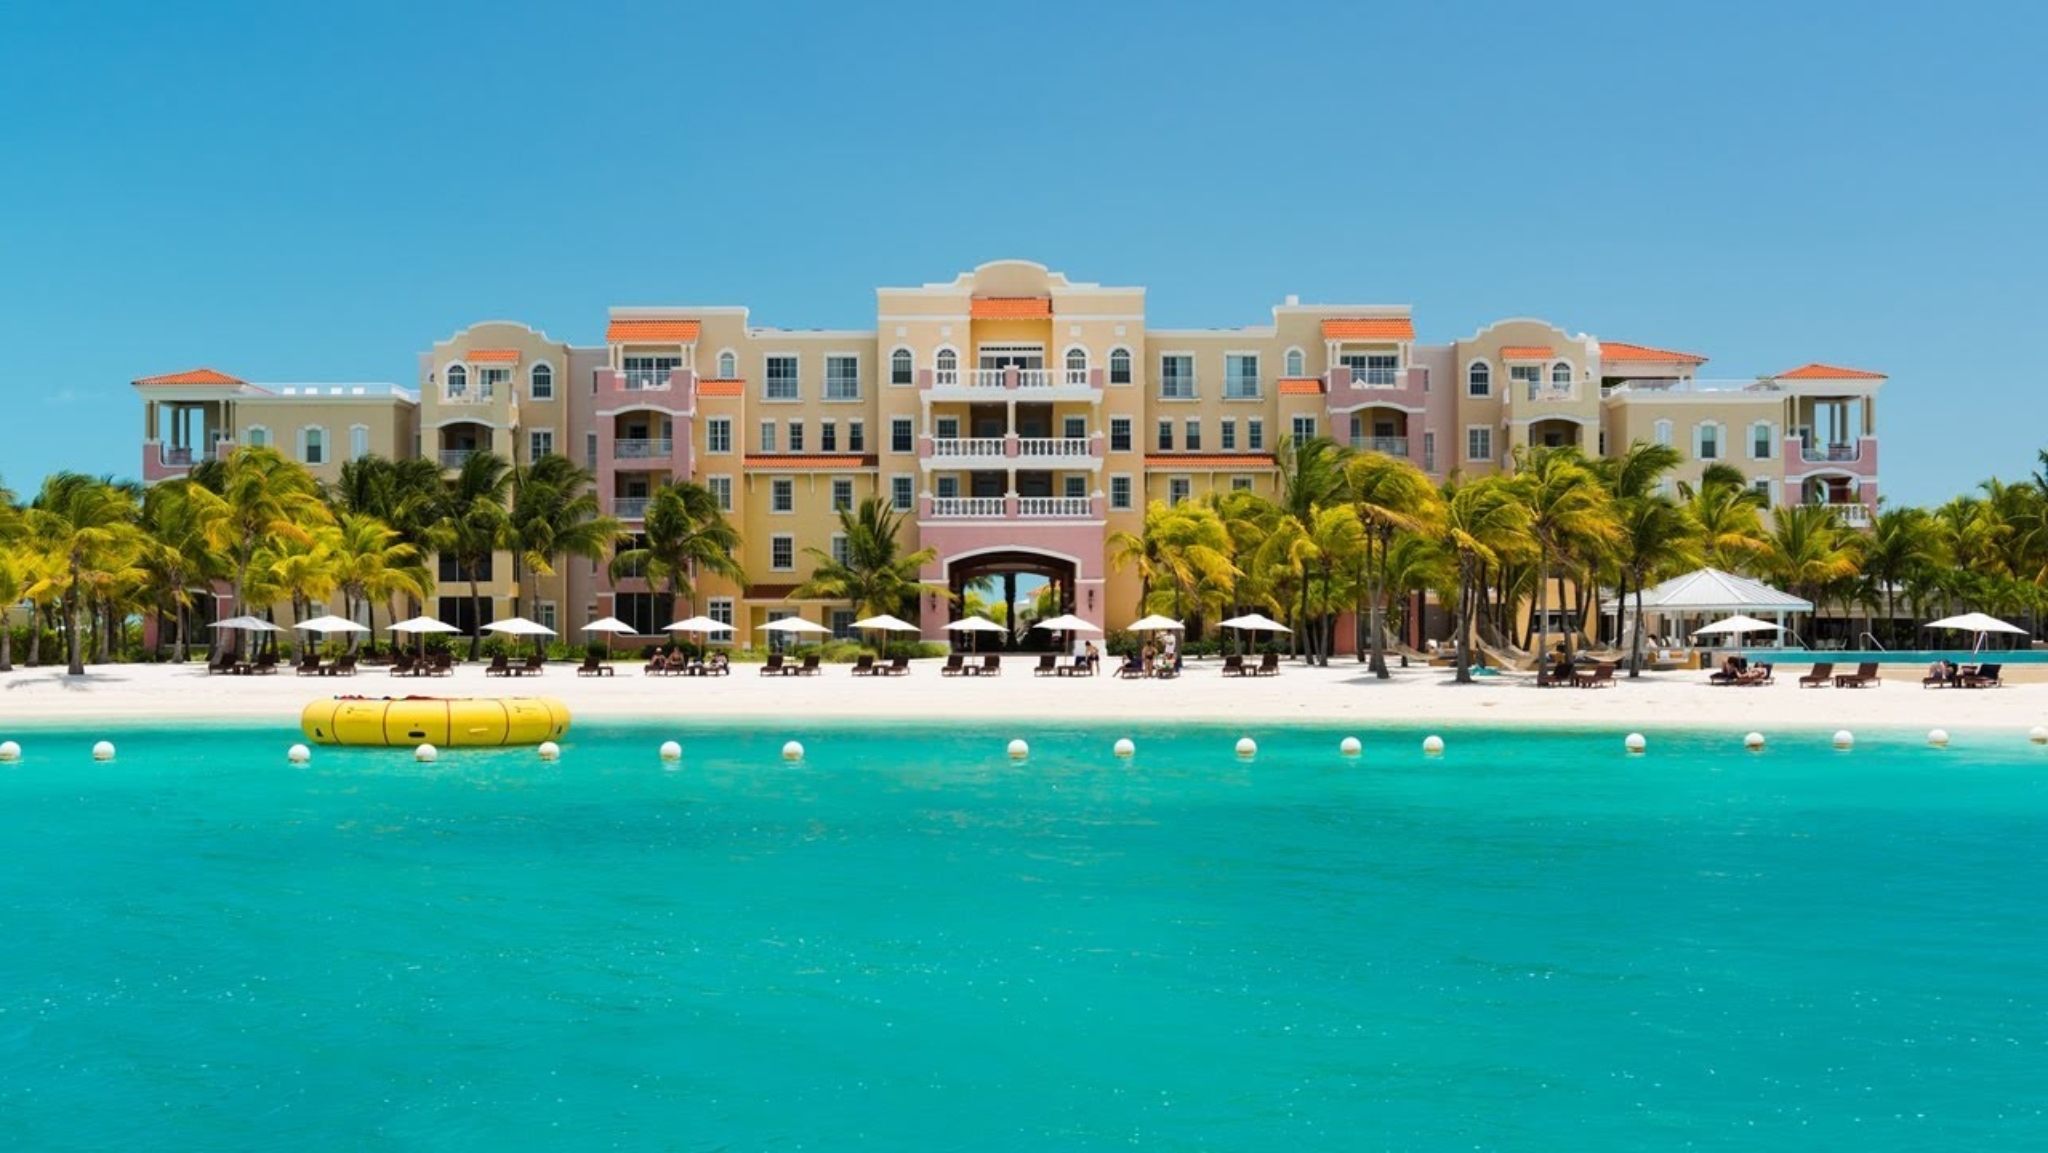 Blue Haven Resort - All Inclusive Turks and Caicos Resort